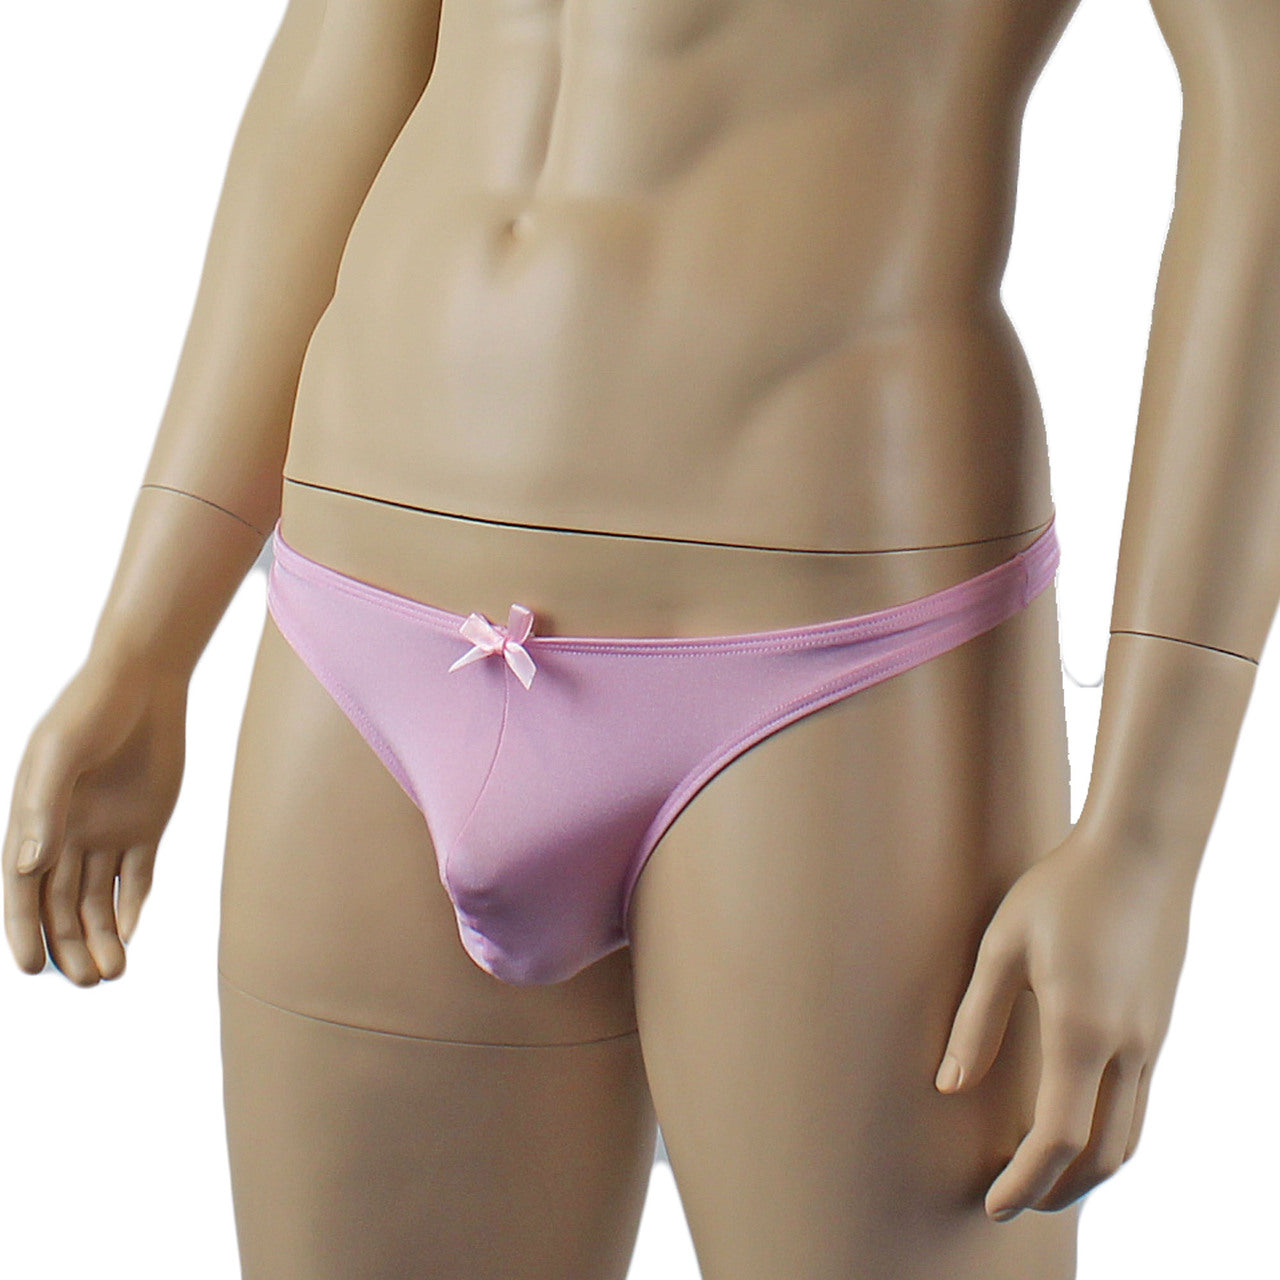 Male Angel Lingerie Stretch Spandex Thong with Bow Pink